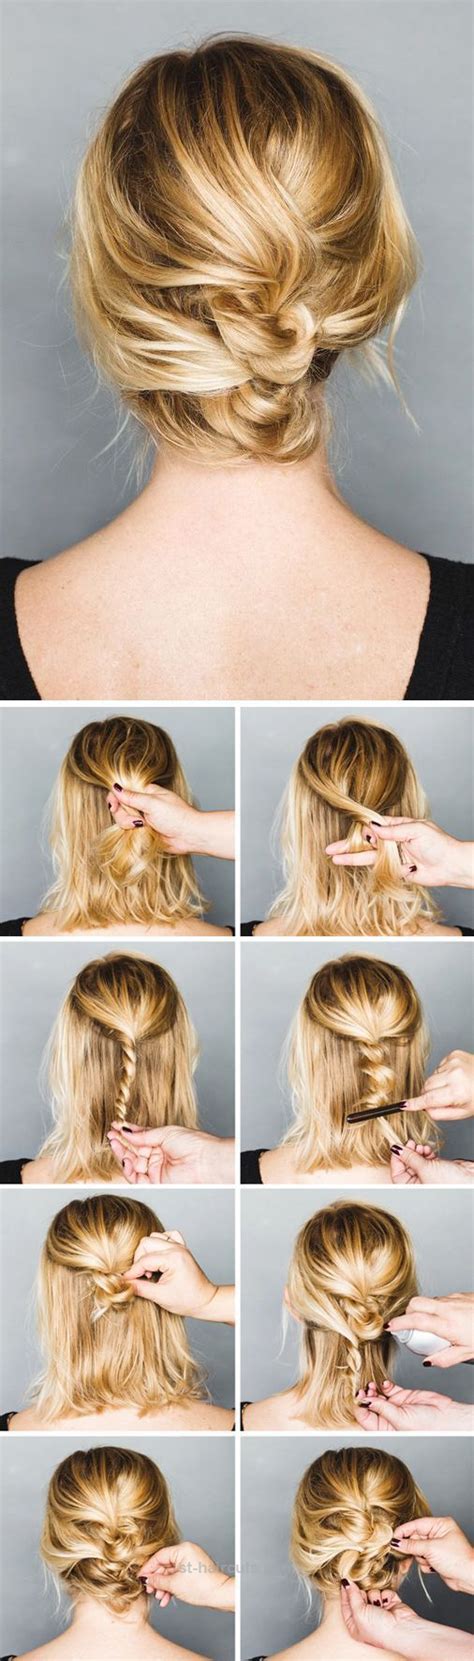 Step By Step Tutorial For Beautiful Hair Updos Page Of Trend